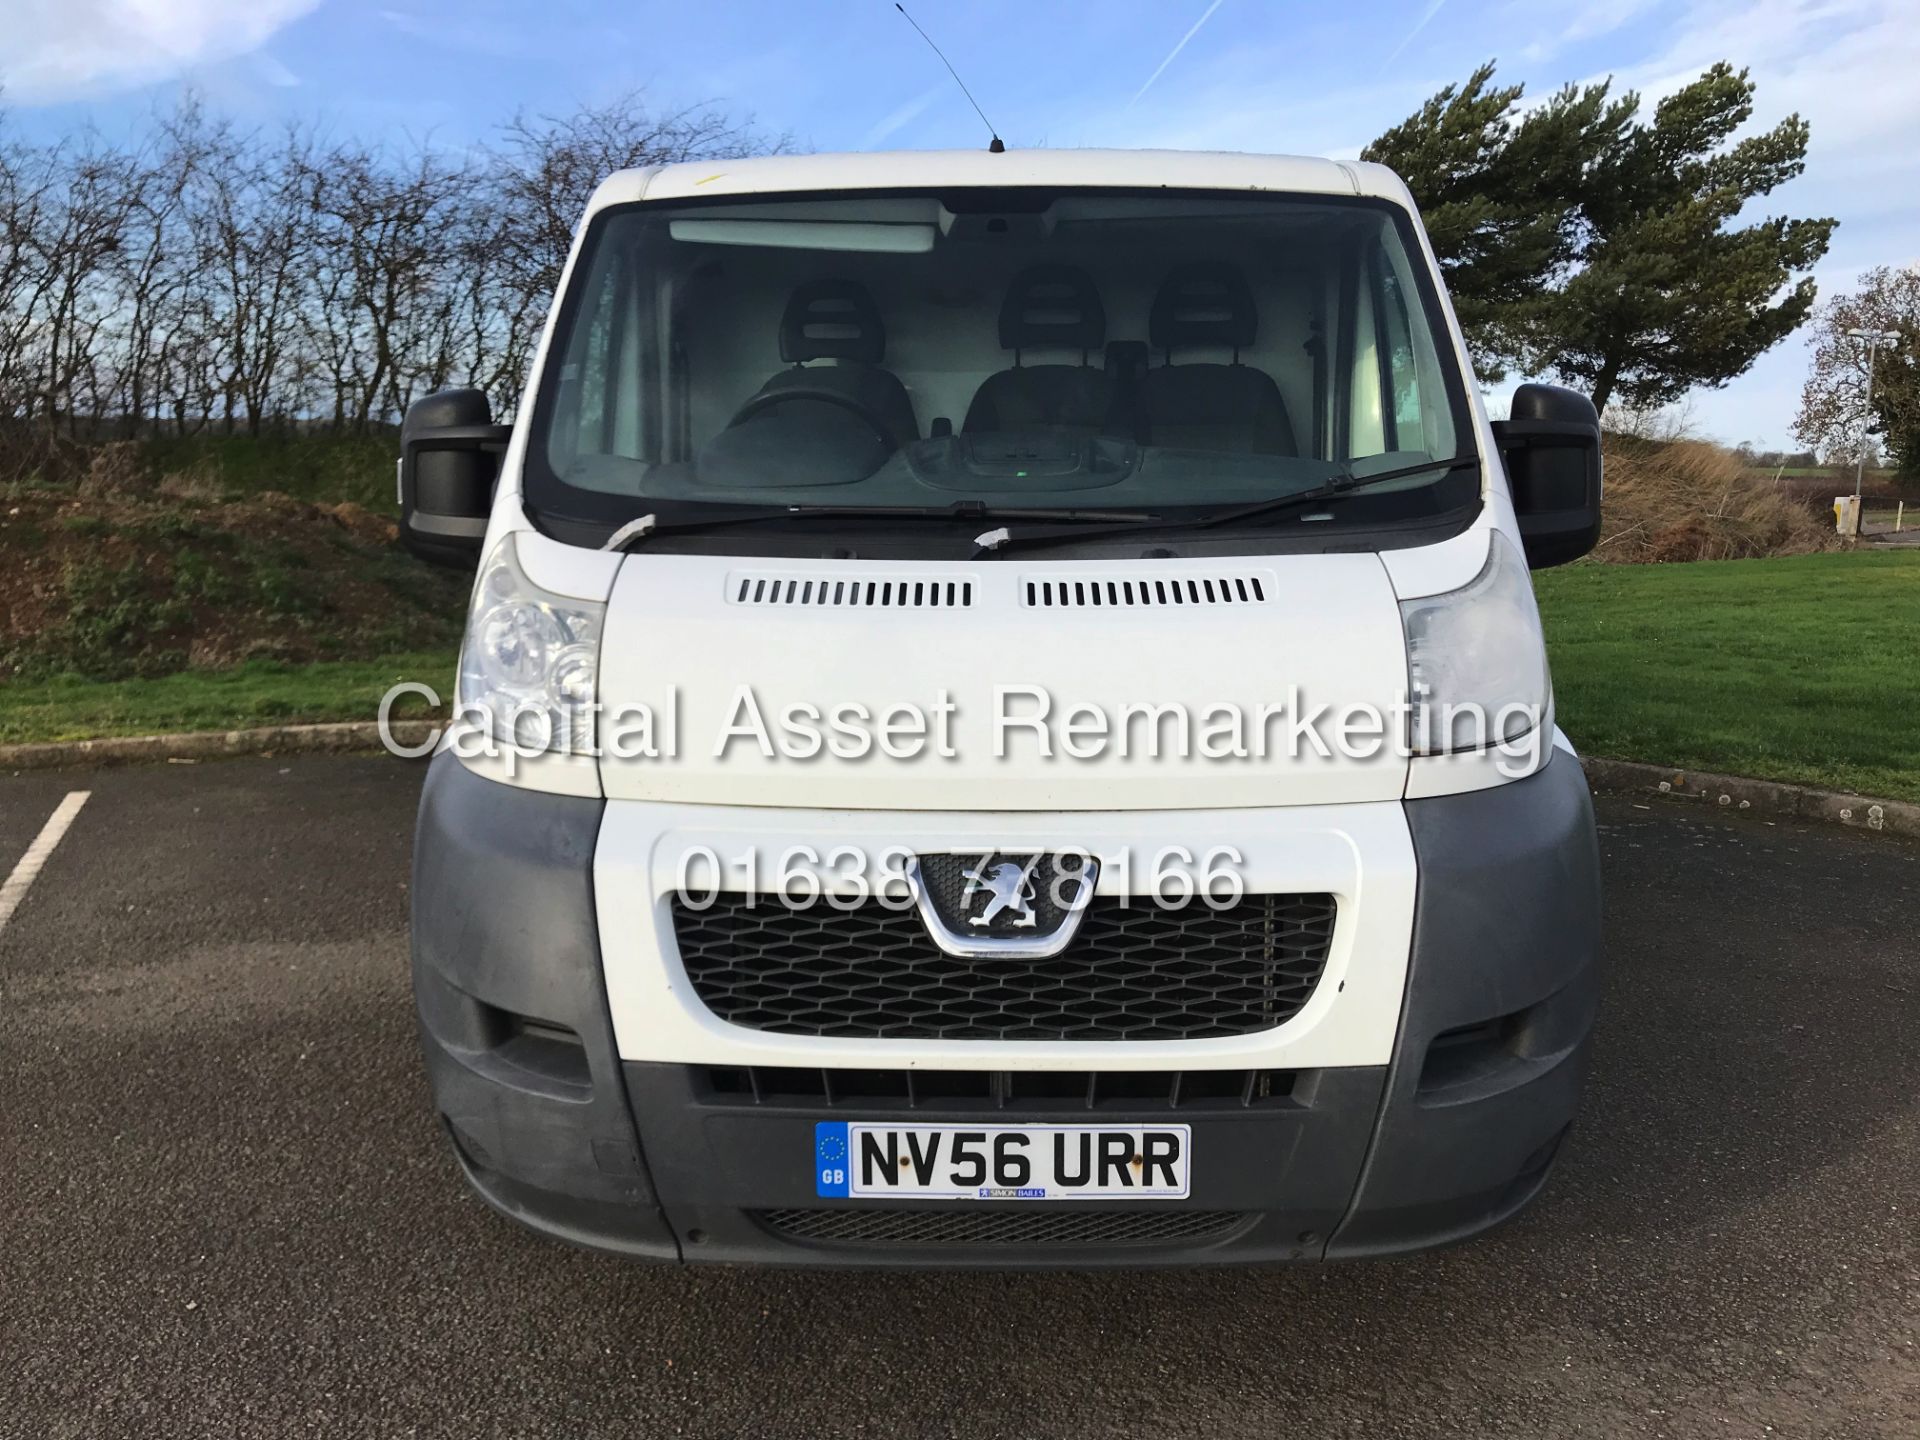 On Sale PEUGEOT BOXER 2.2HDI 330 "120BHP" (2007) 1 OWNER - LOW MILEAGE - LONG MOT - Image 2 of 12